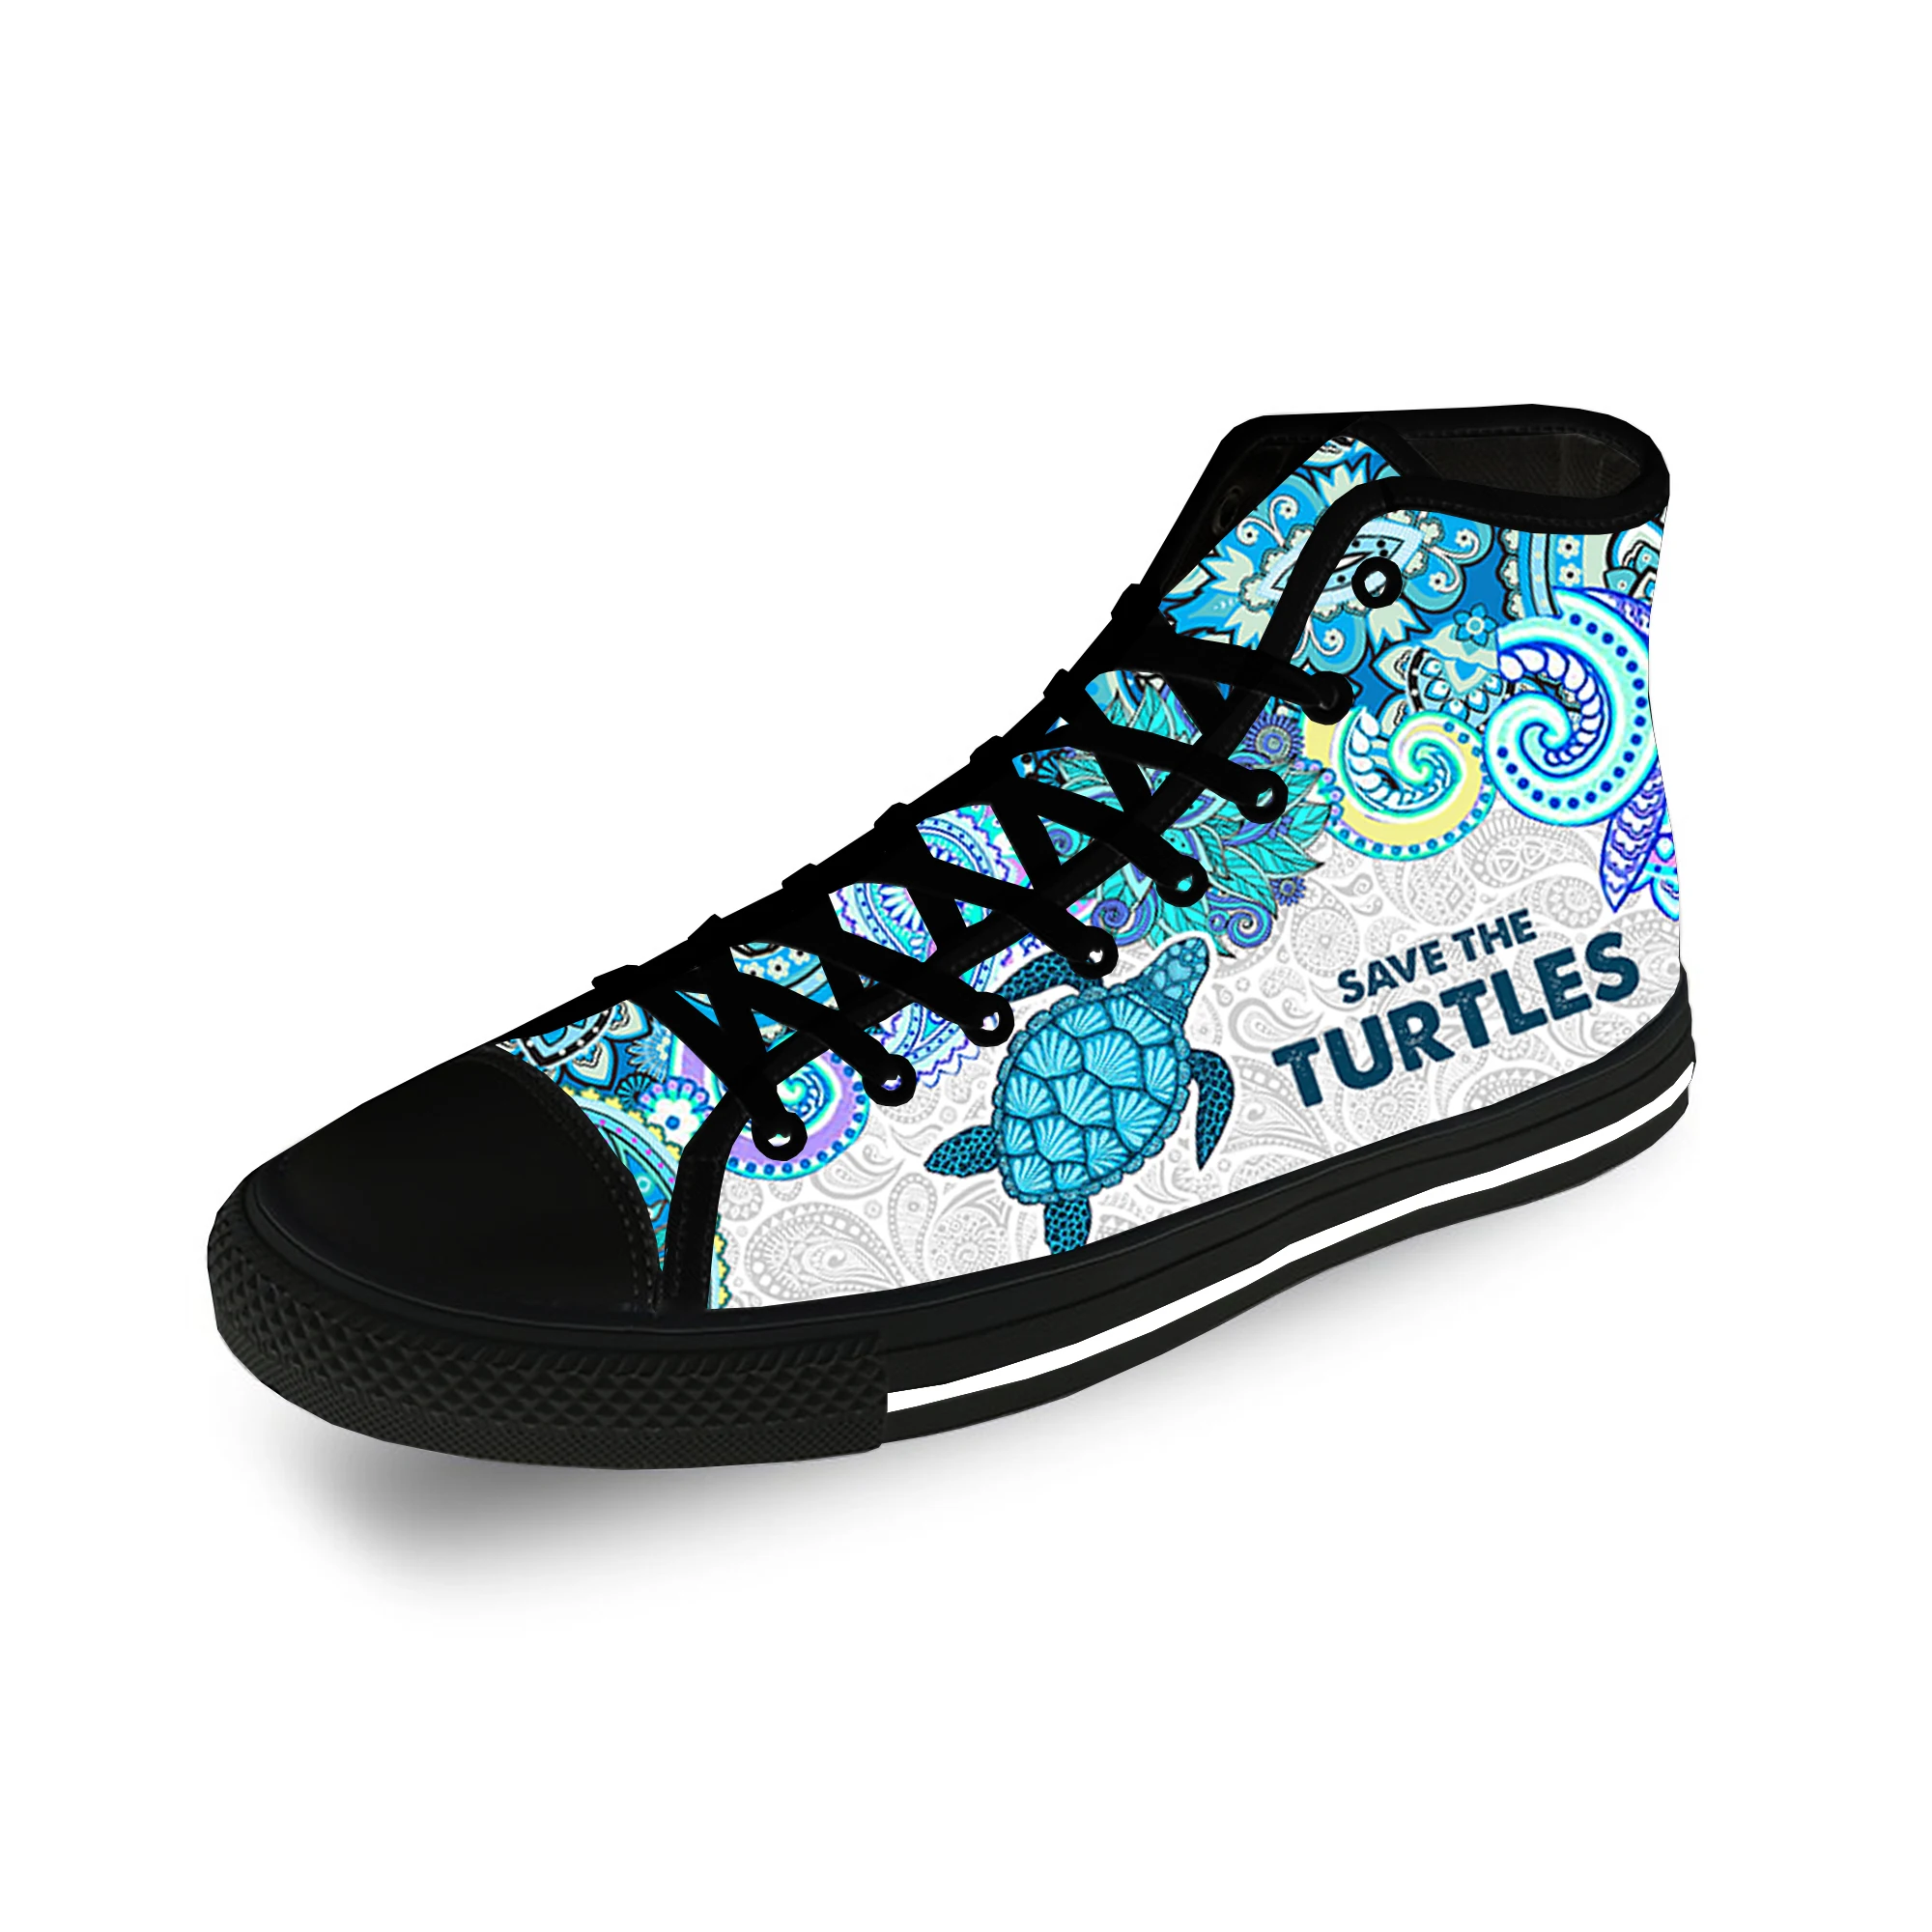 Save The Turtles High Top Sneakers Mens Womens Teenager Casual Shoes Canvas Running Shoes 3D Print Breathable Lightweight shoe